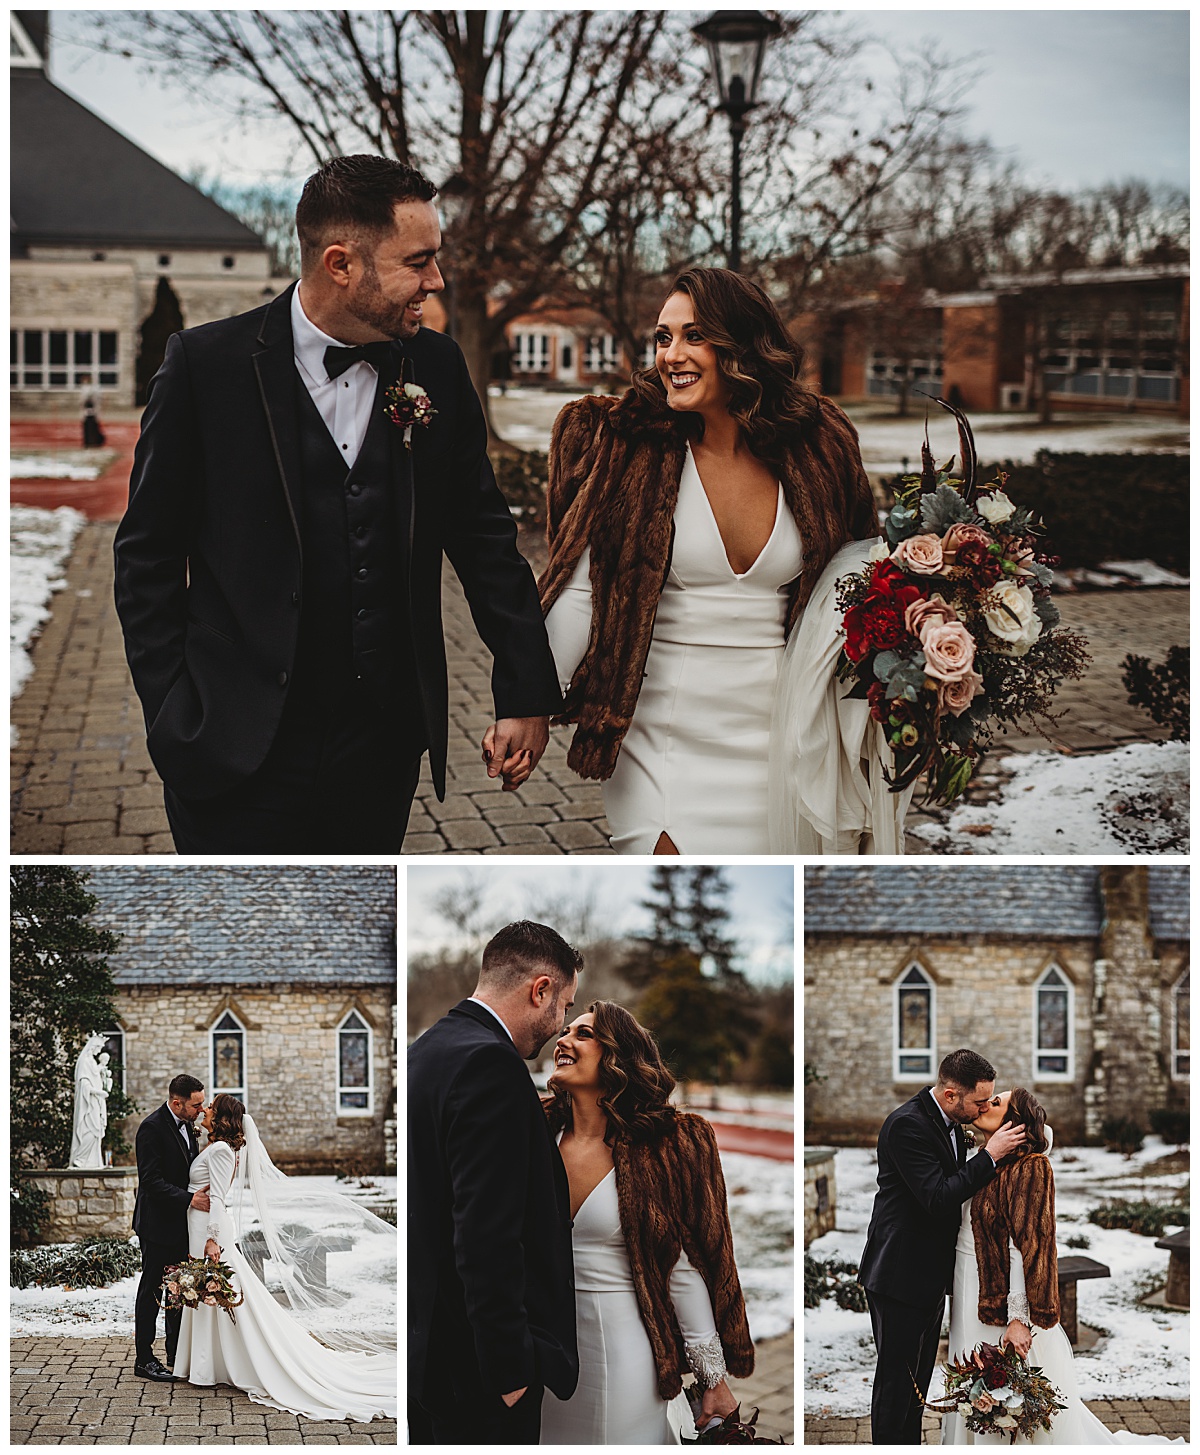 Outdoor bride and groom portraits for a moody winter wedding in Baltimore by Brittany Dunbar Photography, a Baltimore Wedding Photographer.